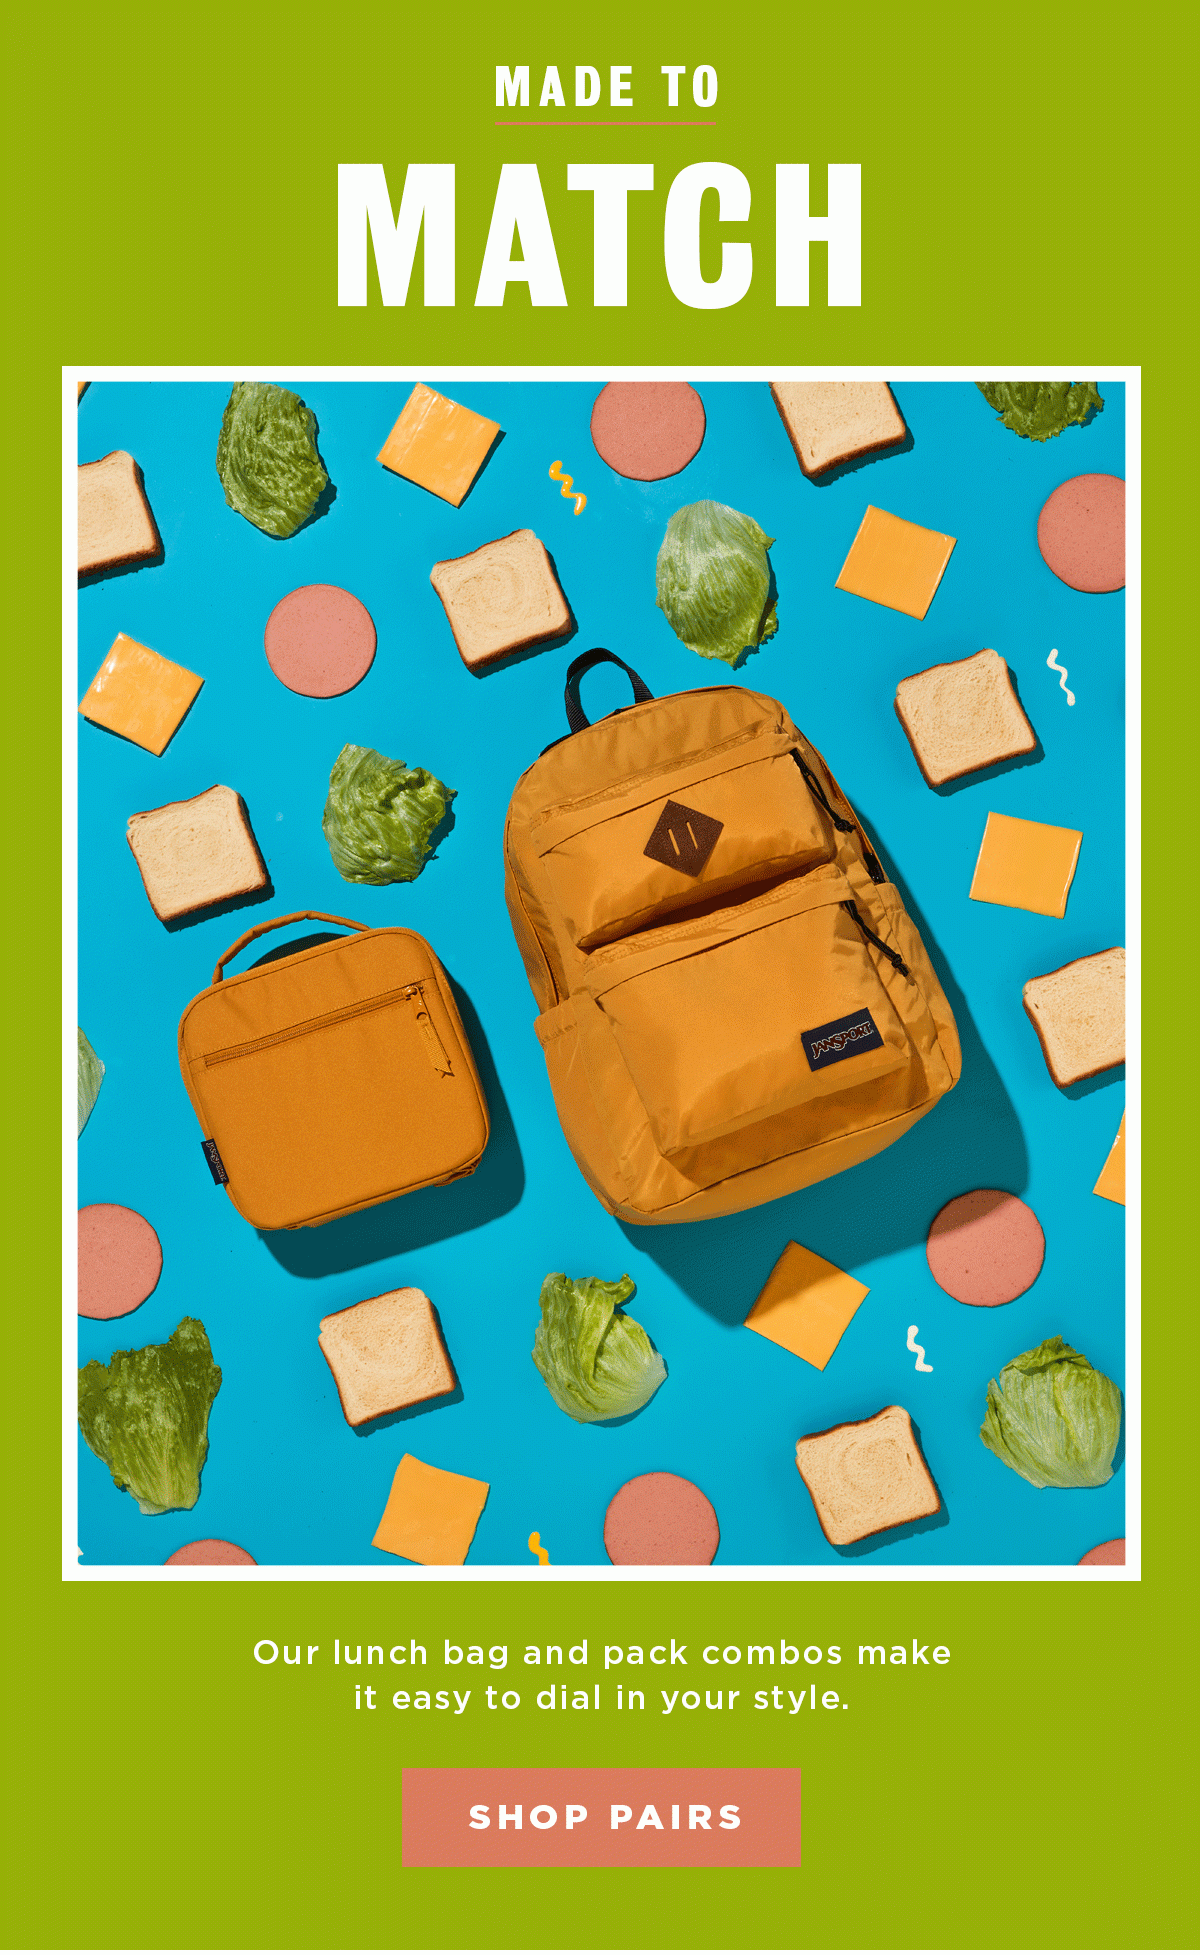 MADE TO MATCH Our lunch and pack combos make it easy to dial in your style. SHOP PAIRS